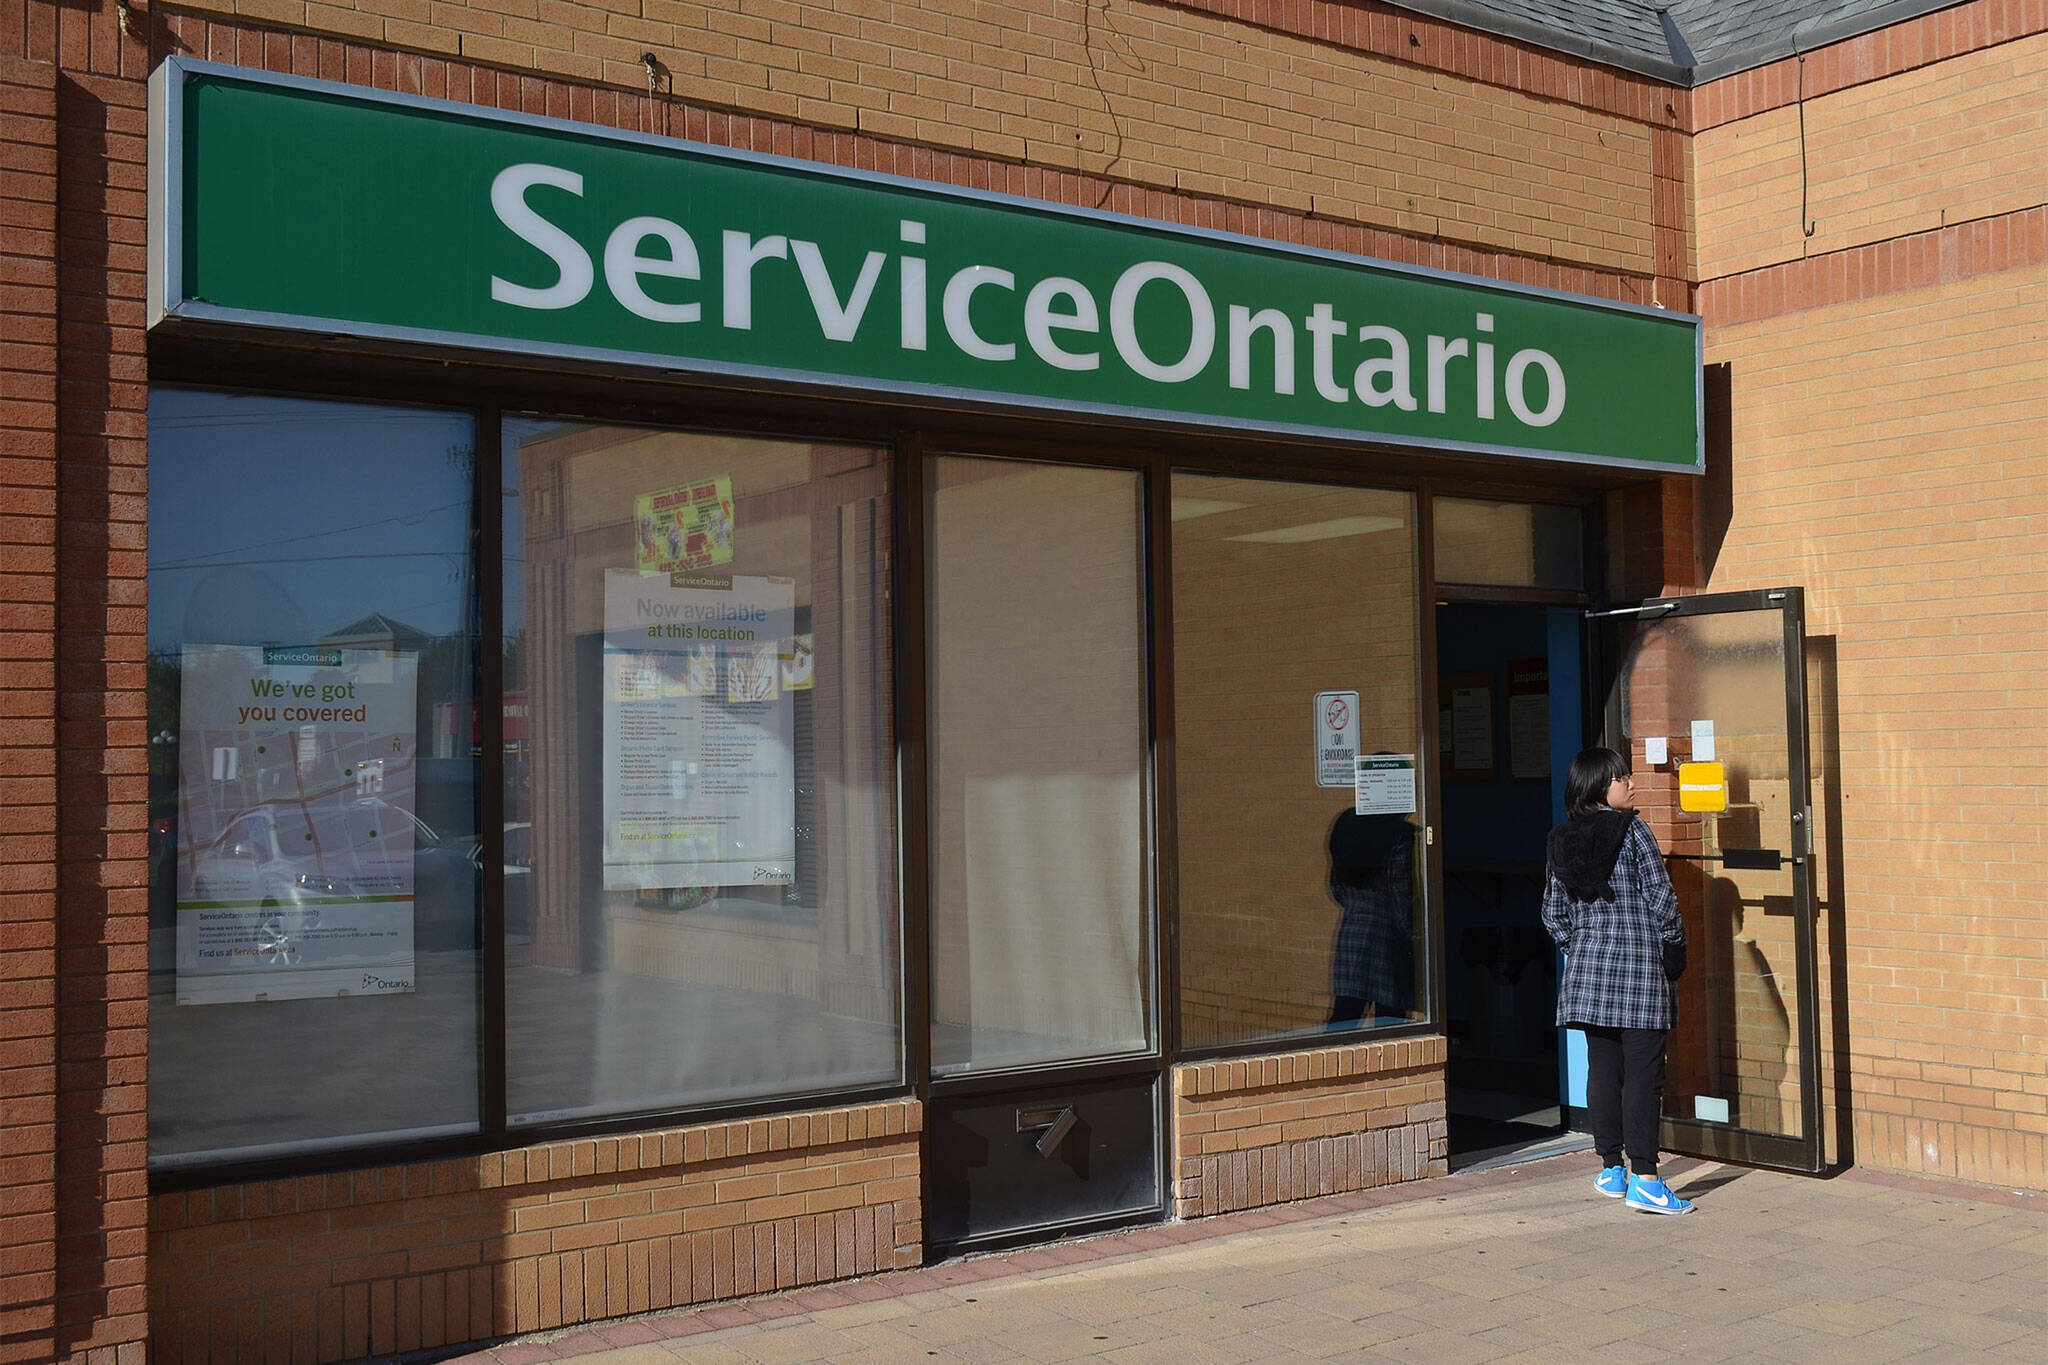 202322 Service Ontario 2 ?w=2048&cmd=resize Then Crop&height=1365&quality=70